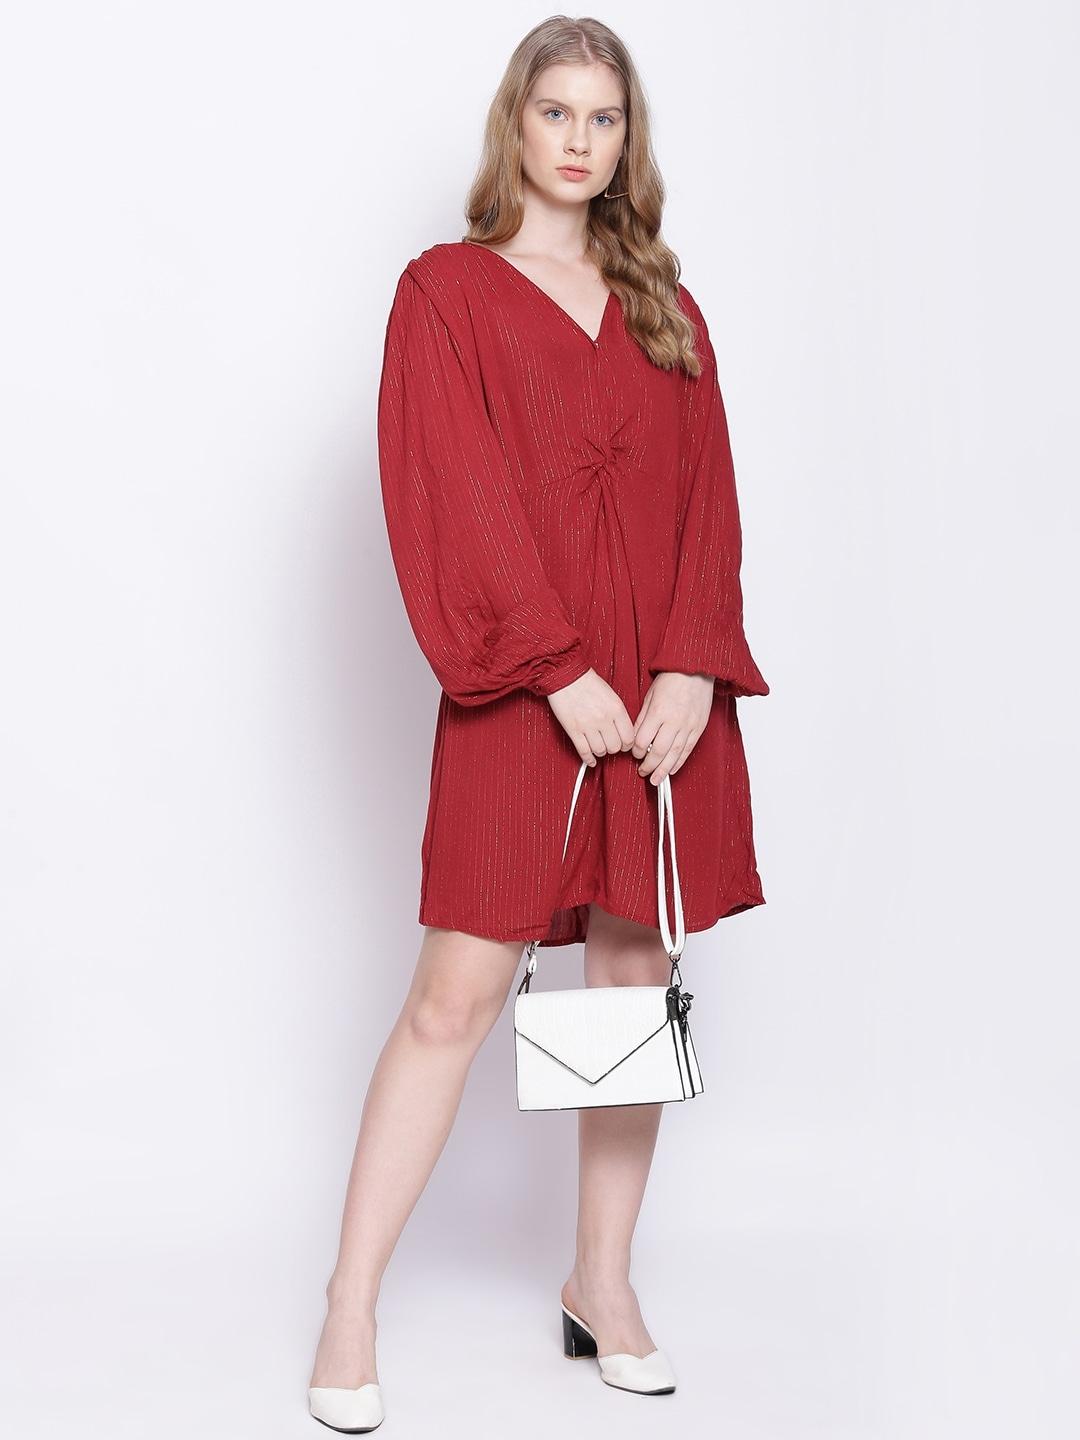 oxolloxo-red-crepe-dress